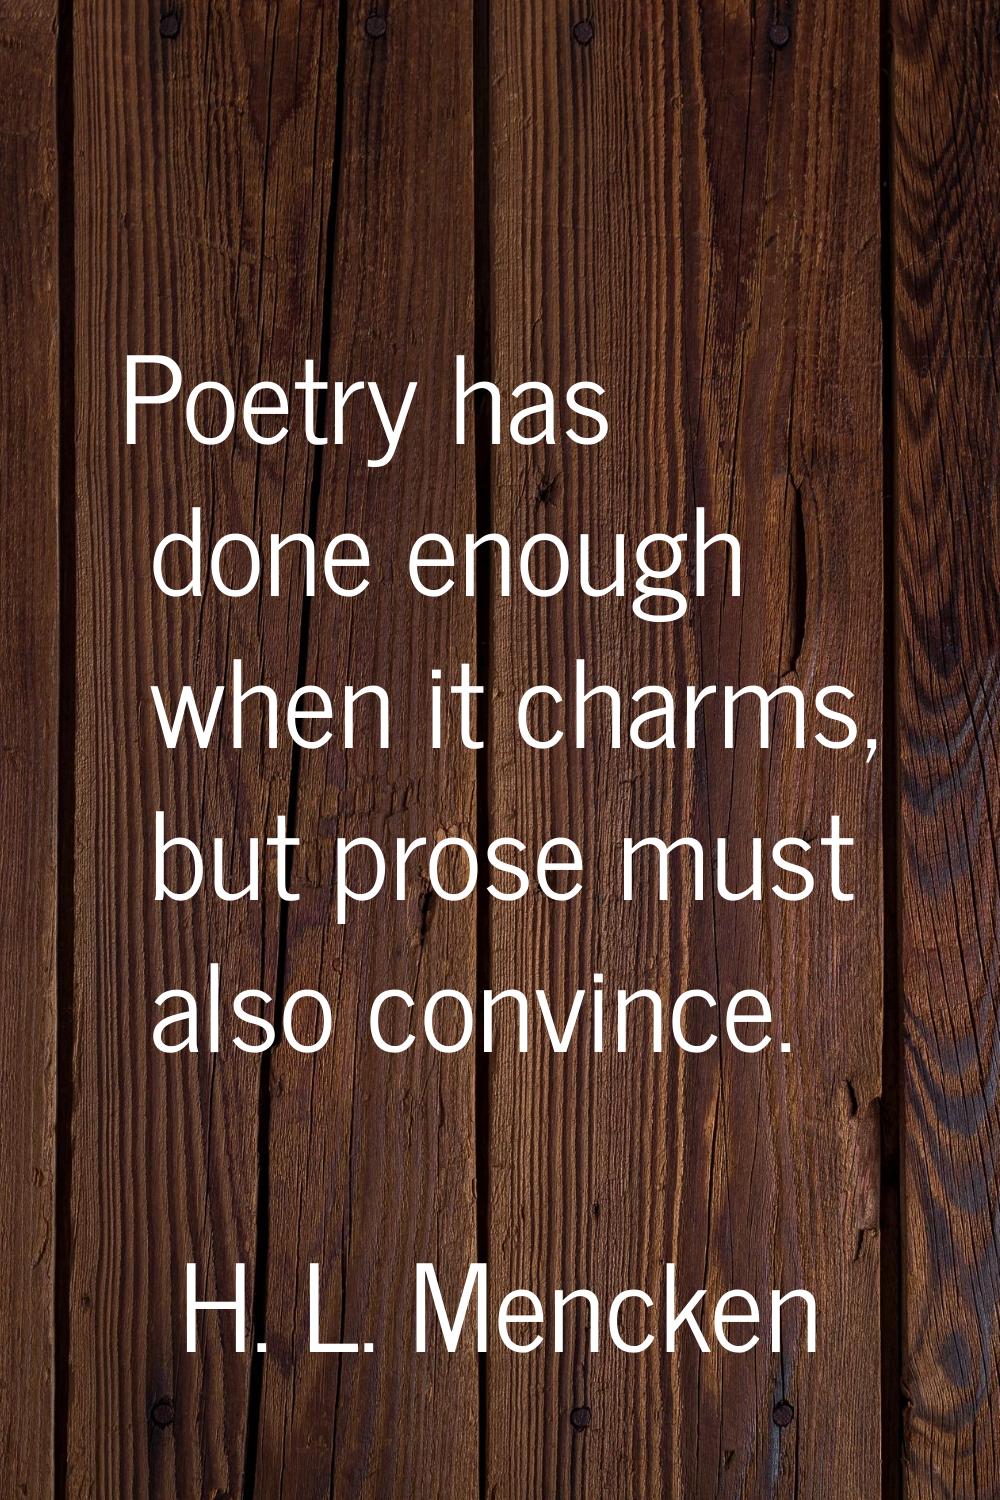 Poetry has done enough when it charms, but prose must also convince.